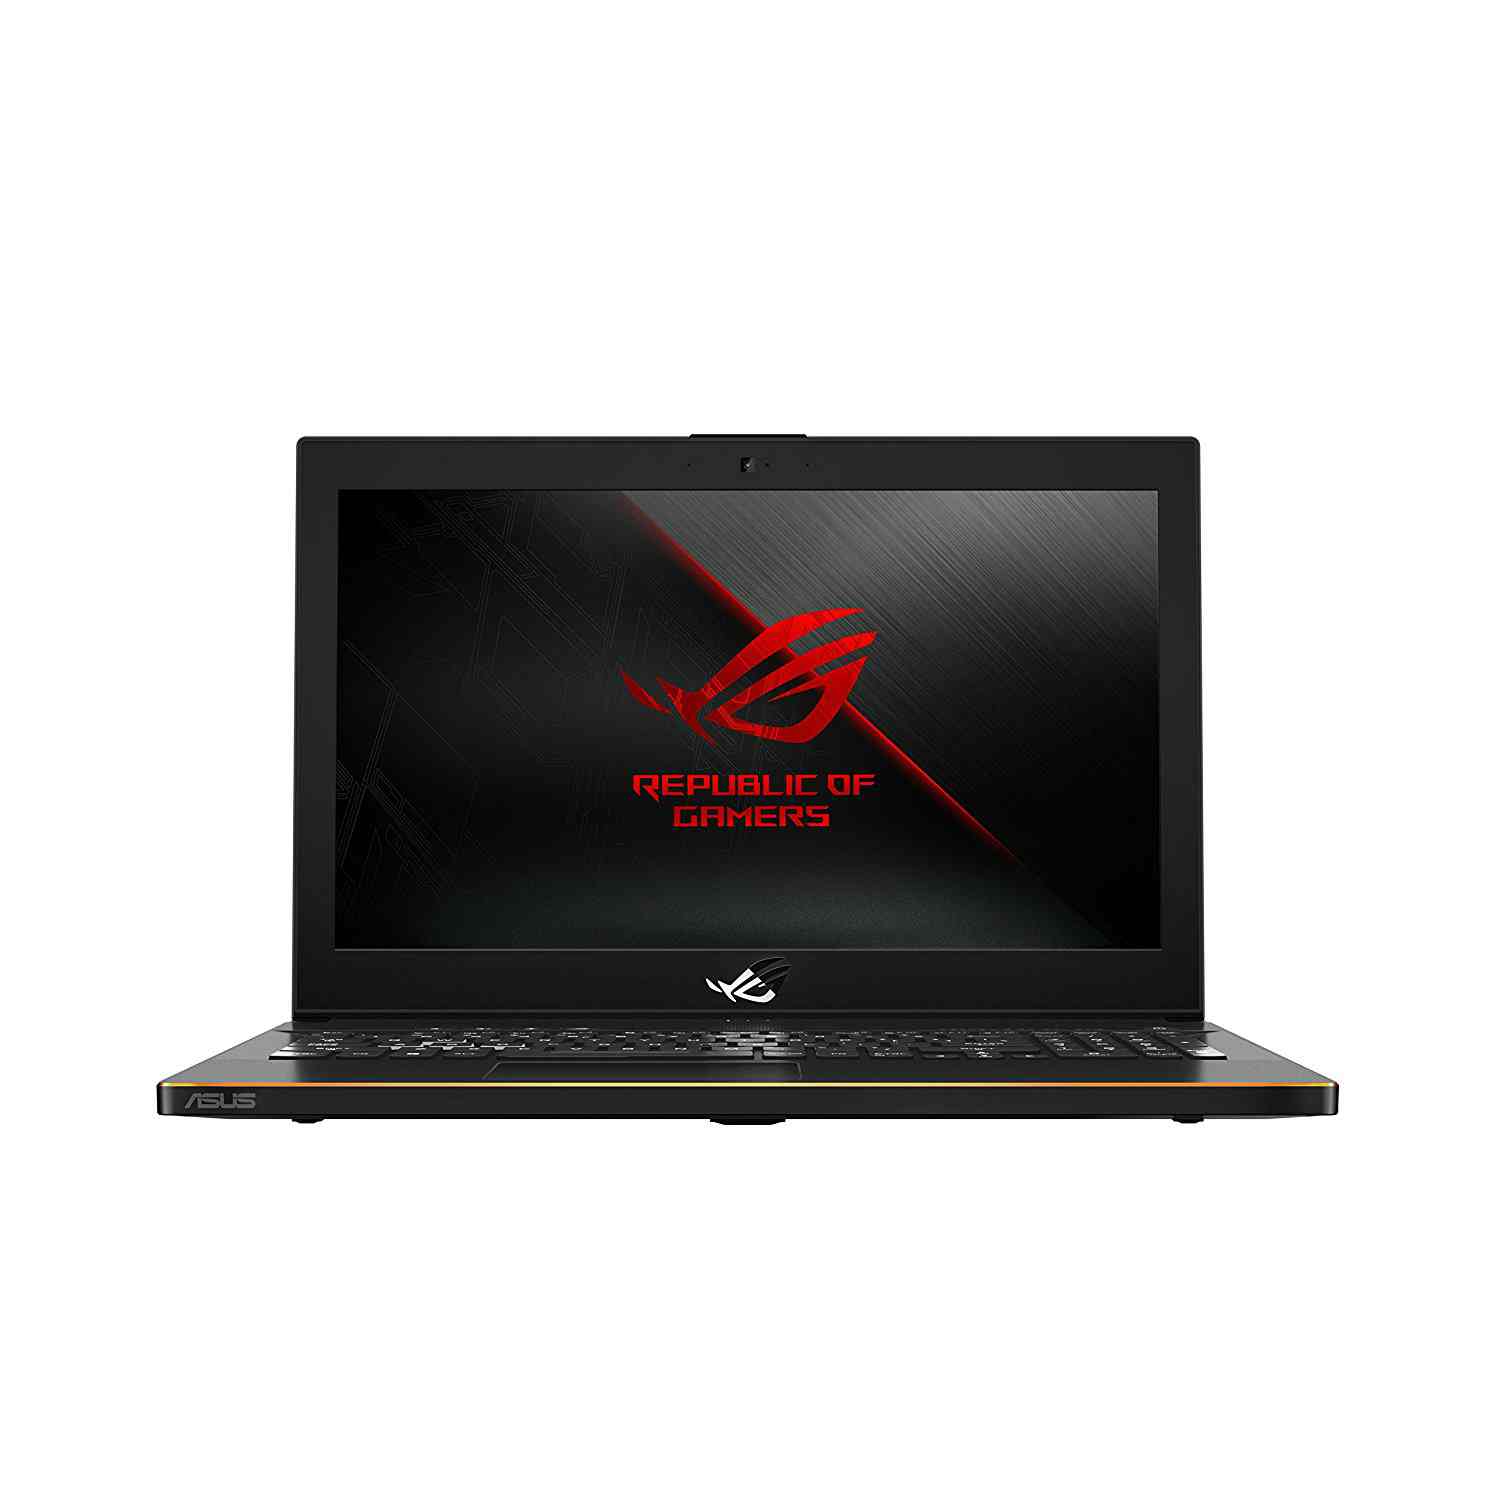 Asus ROG Zephyrus M GM501 Specifications